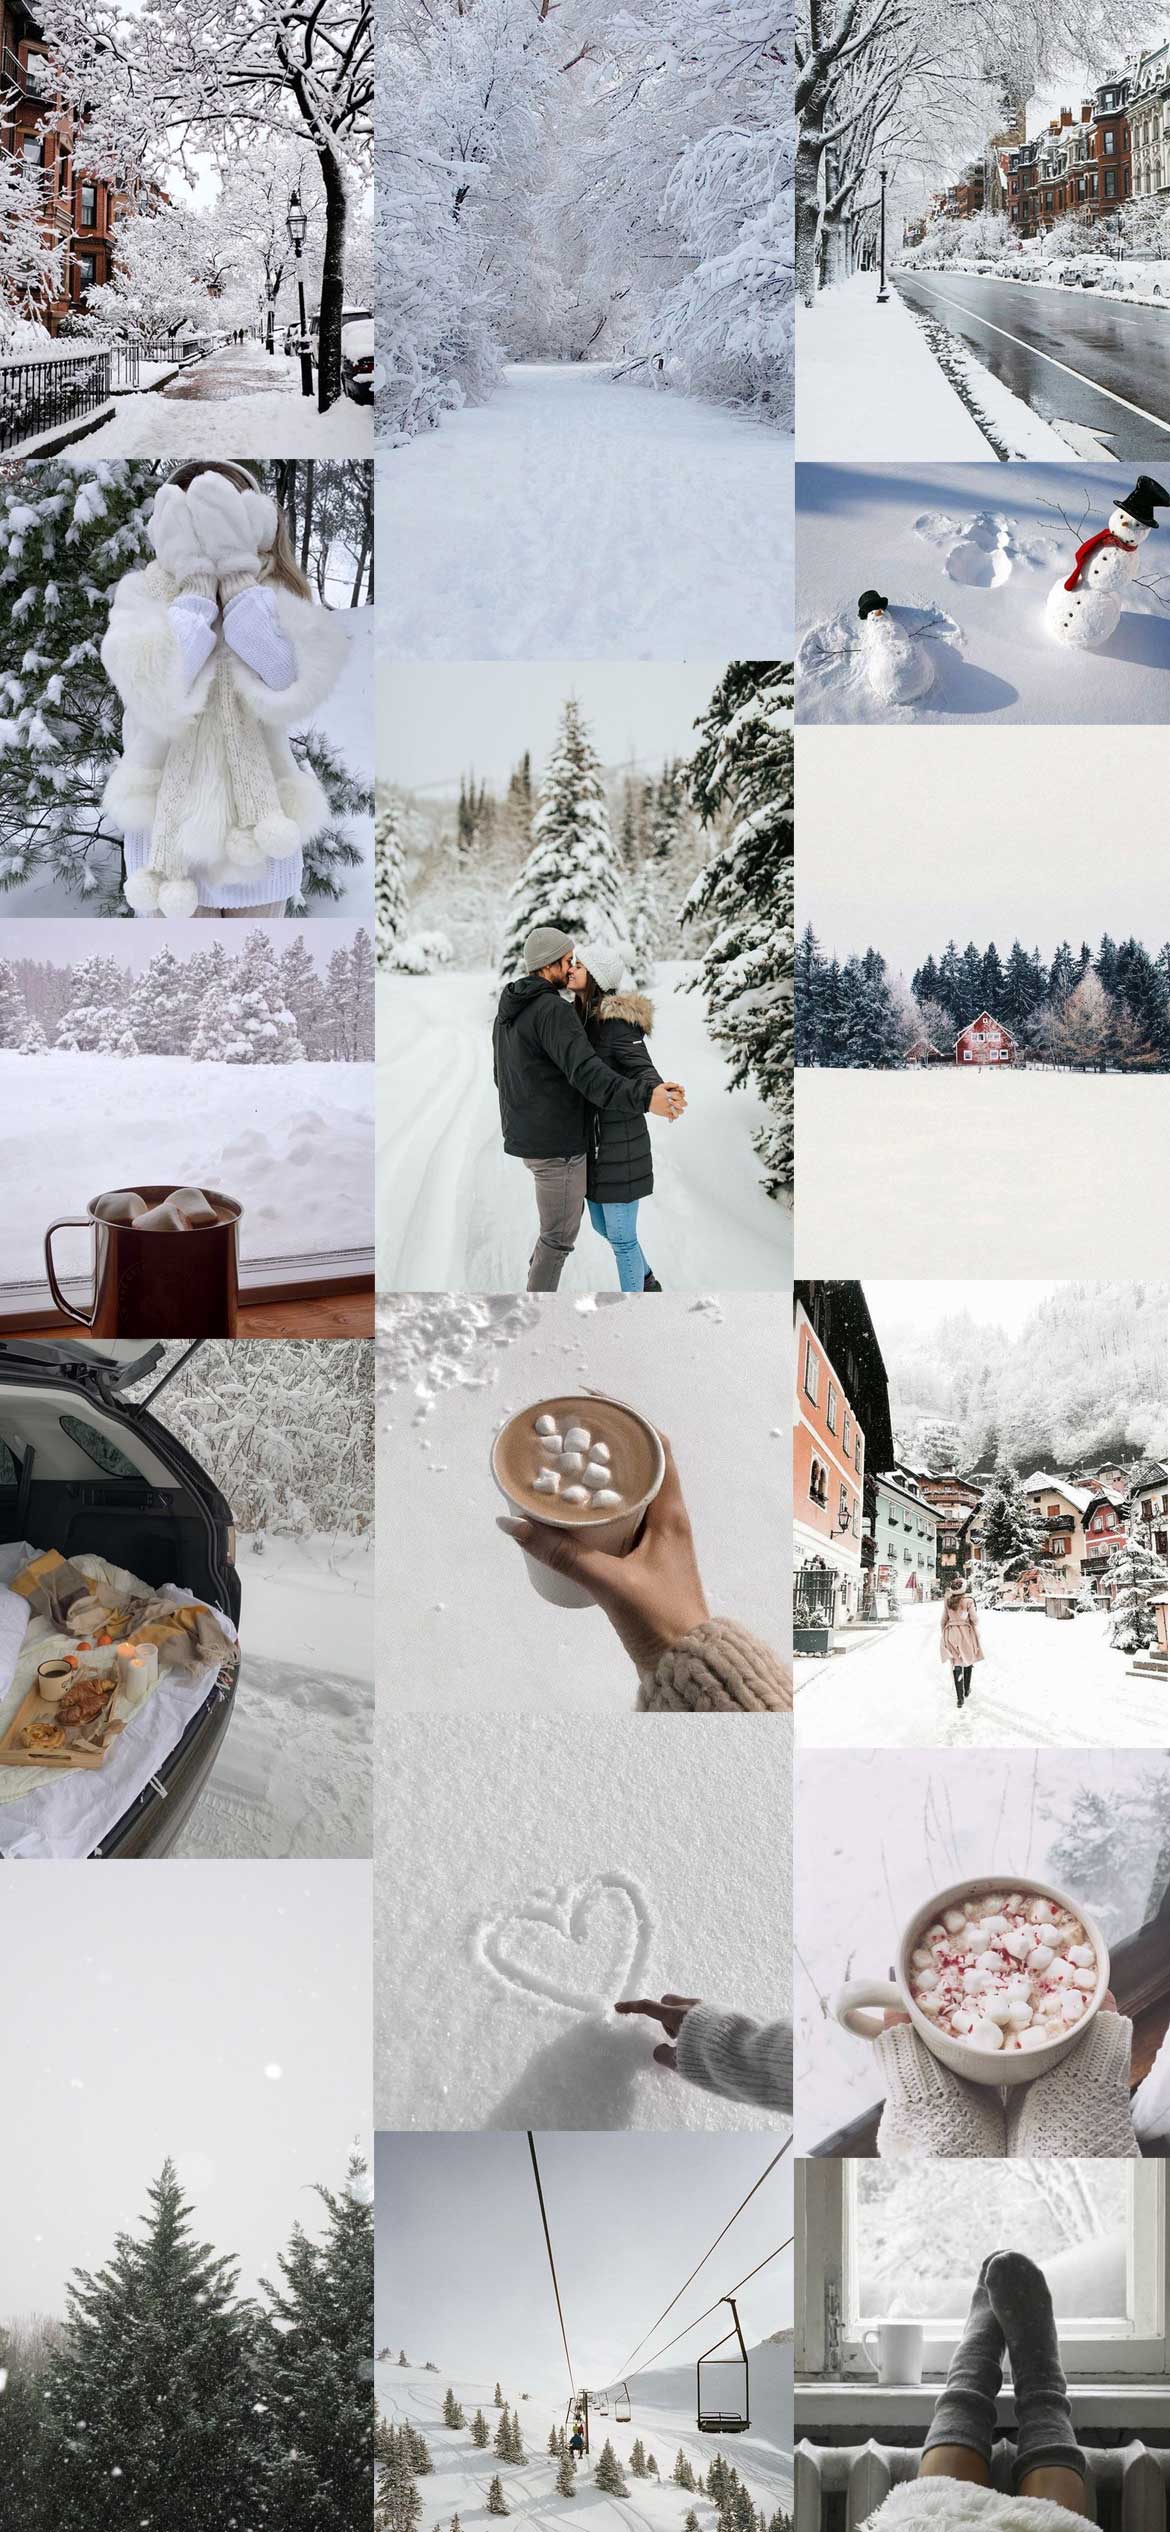 White Winter Collage Wallpaper Ideas : Winter Collage Aesthetic Wallpaper